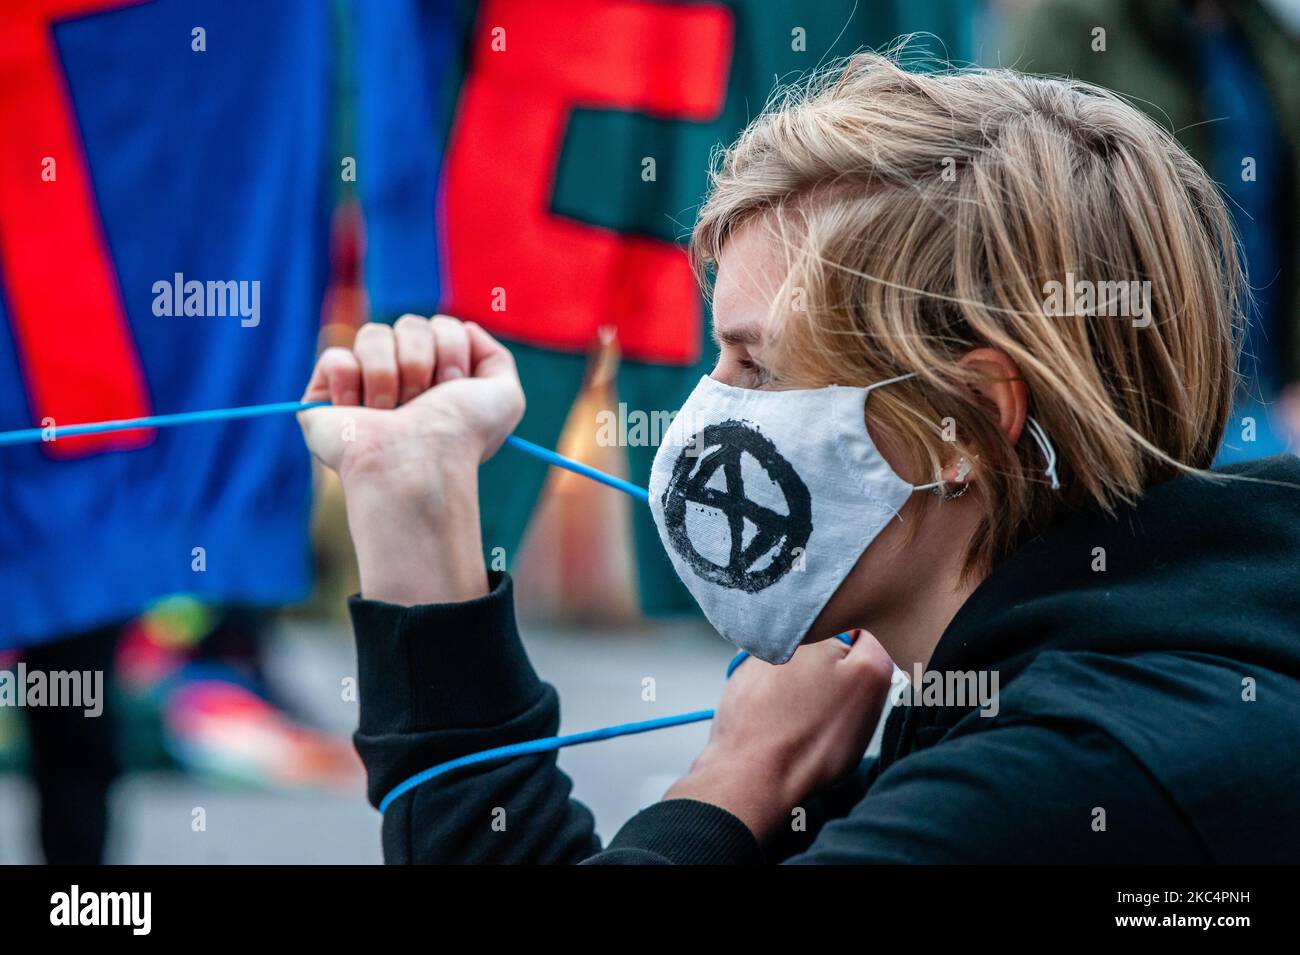 A climate activist is holding a banner while wearing a mask with the Extinction Rebellion logo on it, during the 'Circus protest' against Black Friday, in Utrecht, on November 27th, 2020. (Photo by Romy Arroyo Fernandez/NurPhoto) Stock Photo